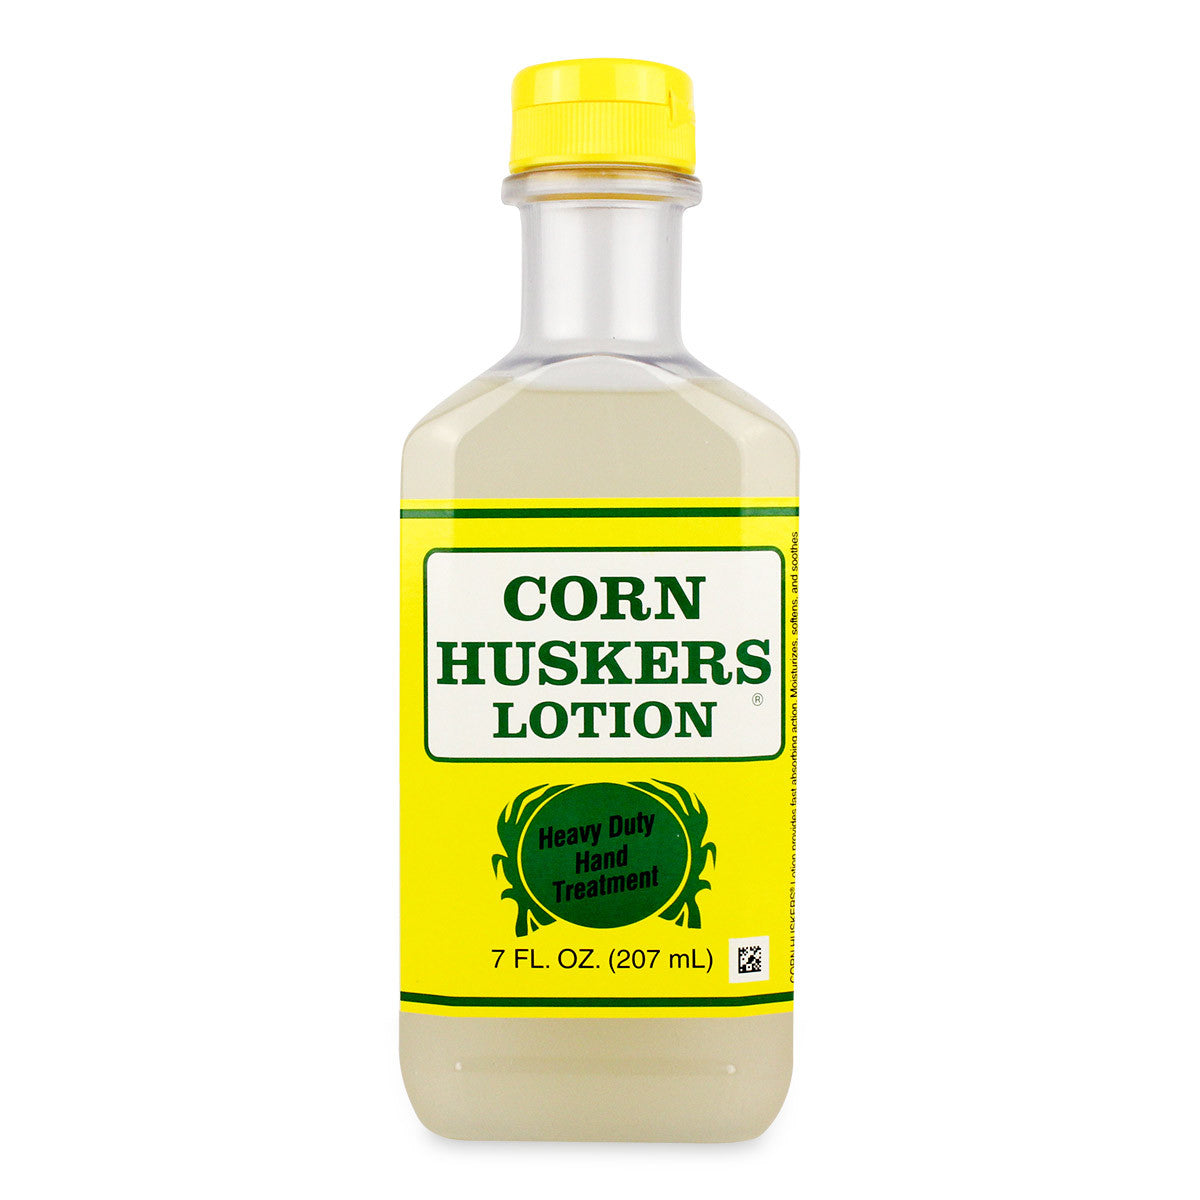 Primary image of Corn Huskers Lotion